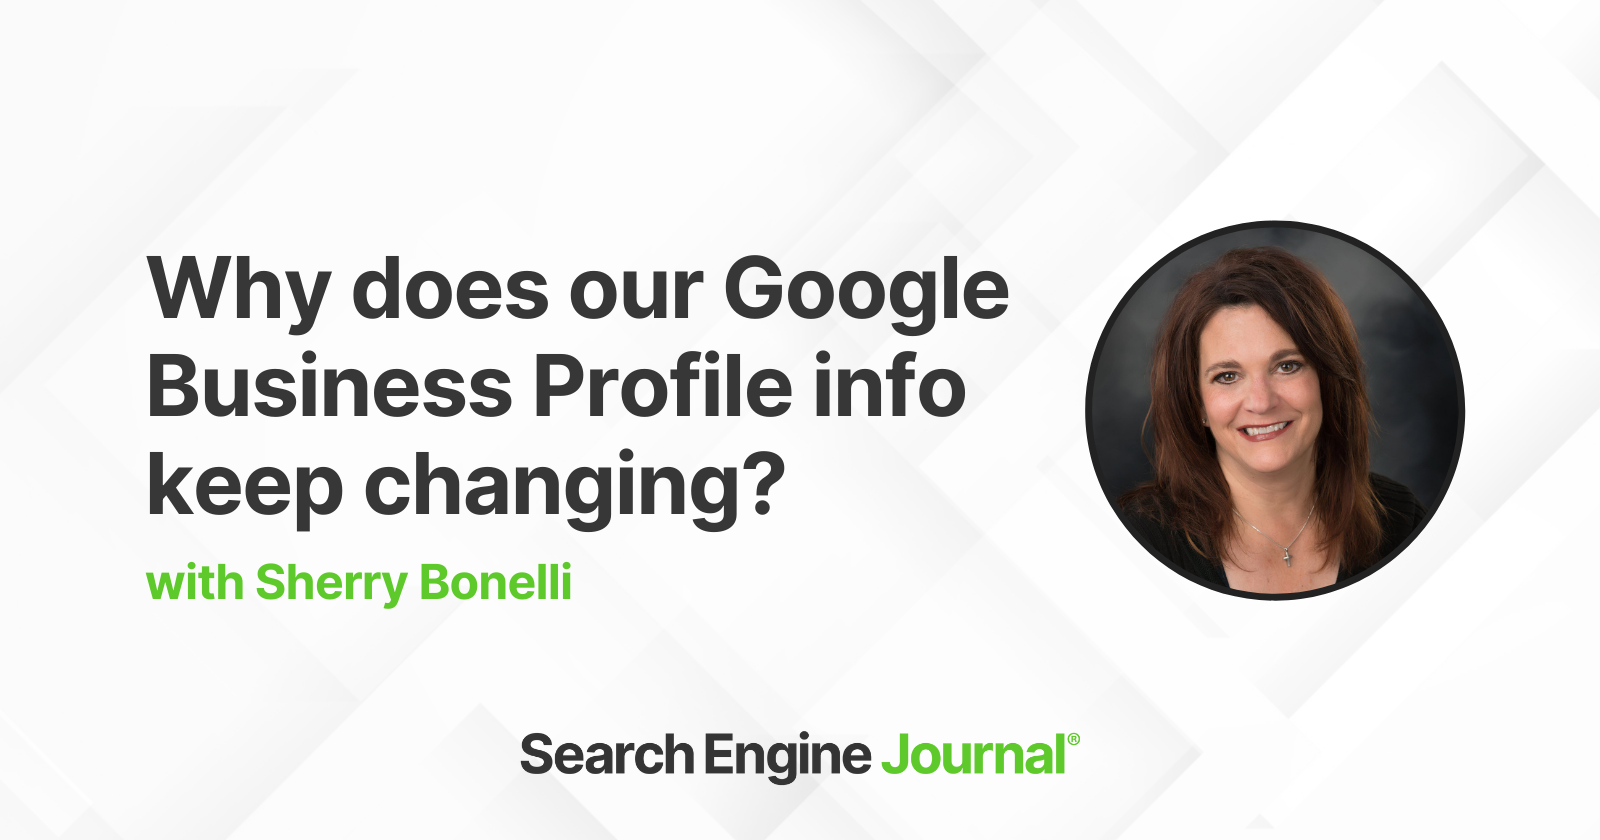 Why does our Google Business Profile info keep changing?